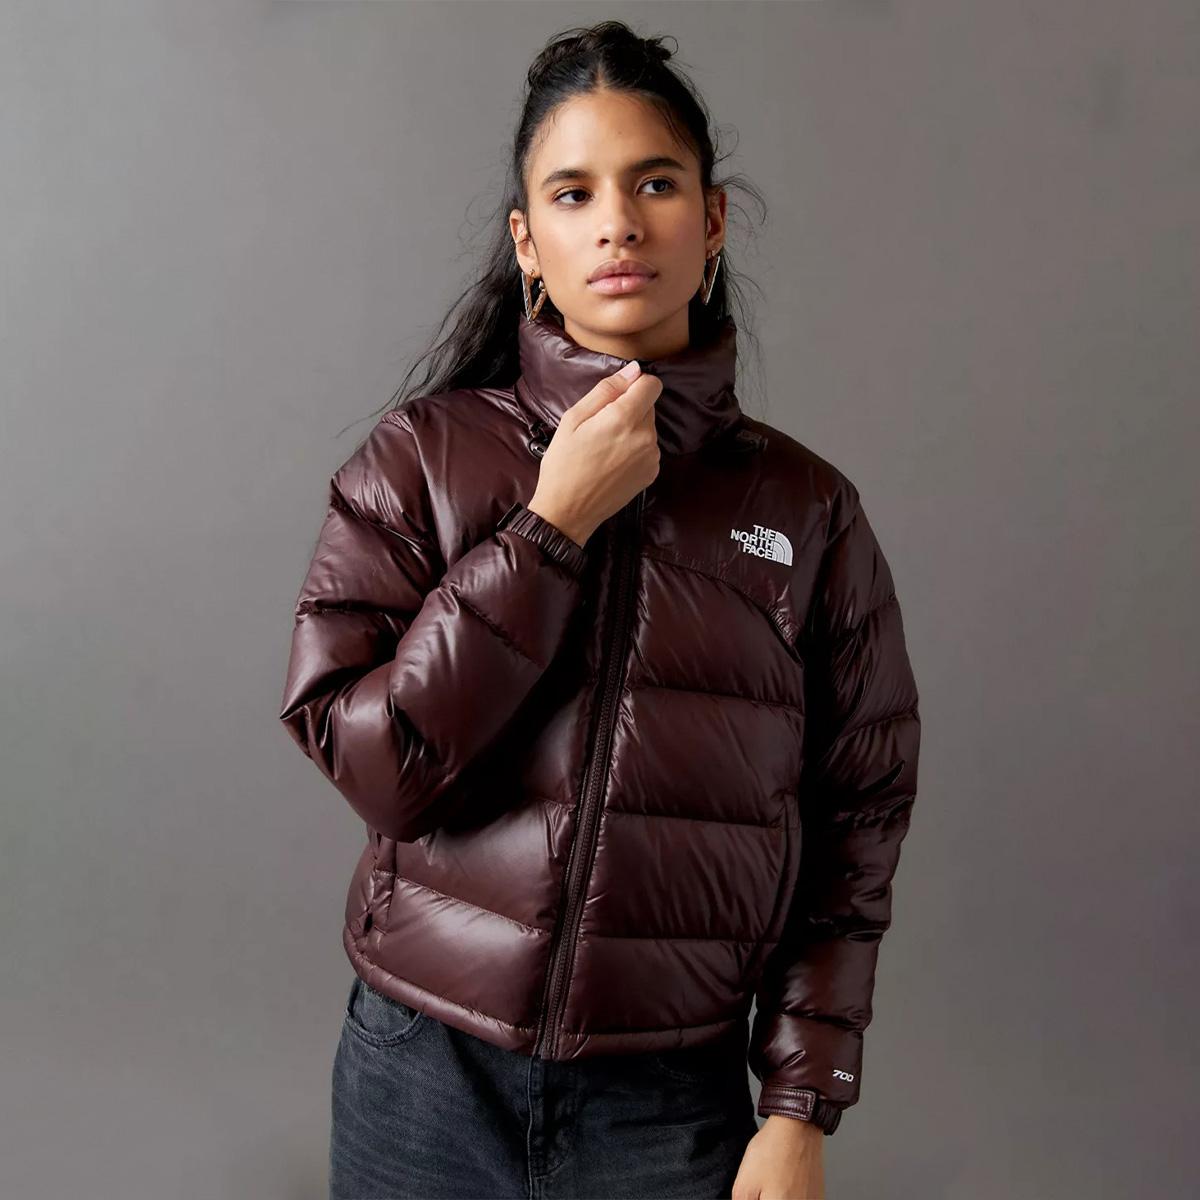 North Face Colorway Puffer